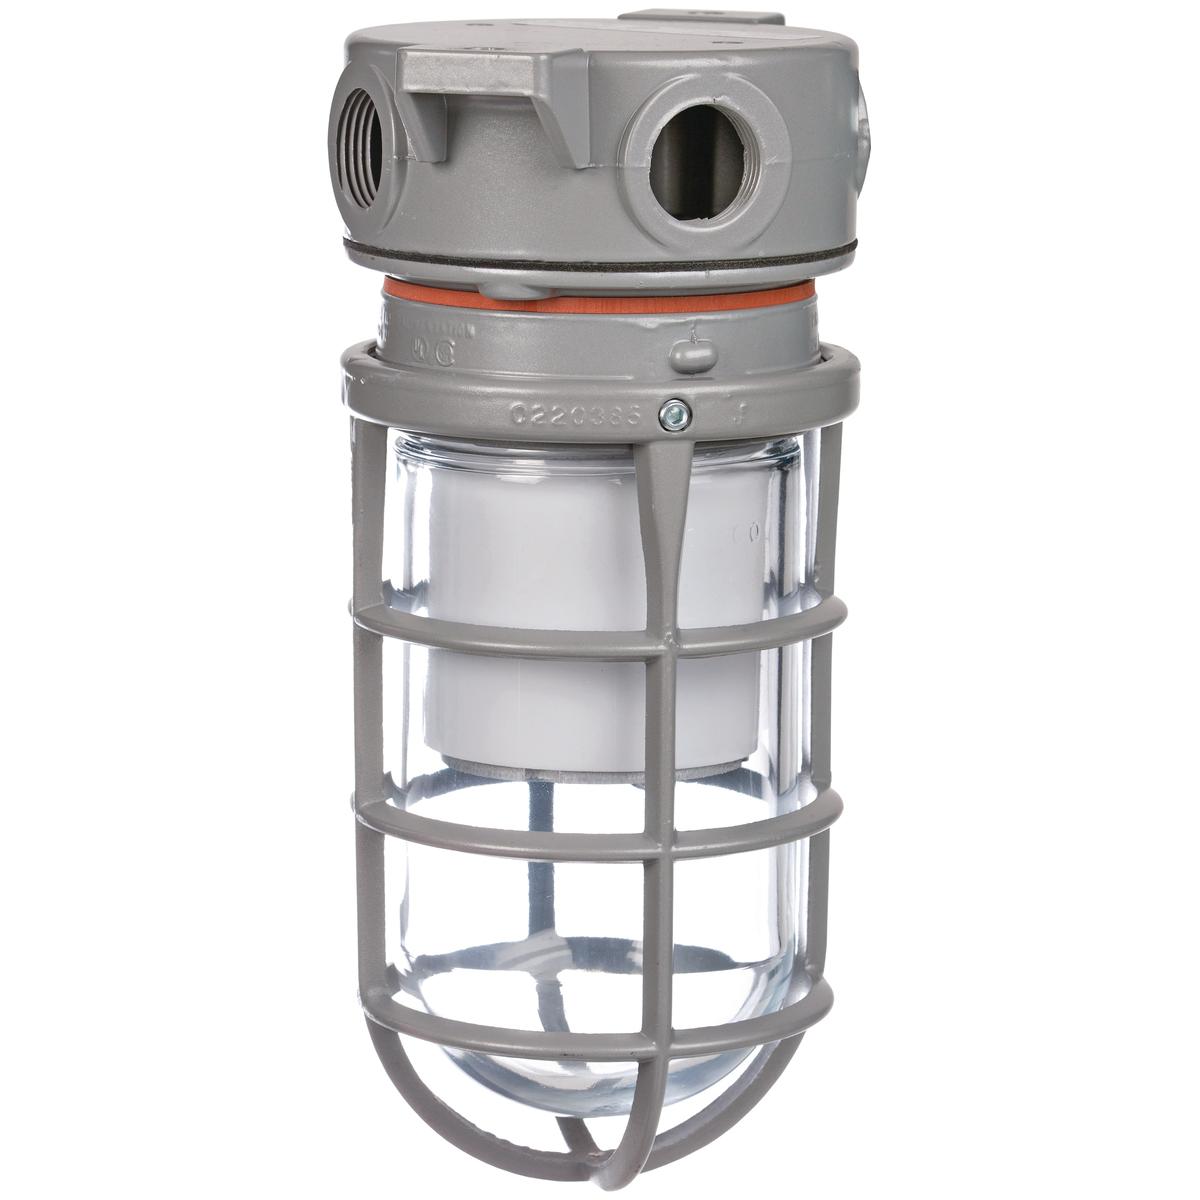 Hubbell VSL1330F2HG-CP The VSL Series is a Vapor Tight/ Utility fixture using energy efficient LED's. This fixture is made with a cast copper-free aluminum housing and mount that is  suitable for harsh and hazardous environments. With the design of this fixtures internal heat s